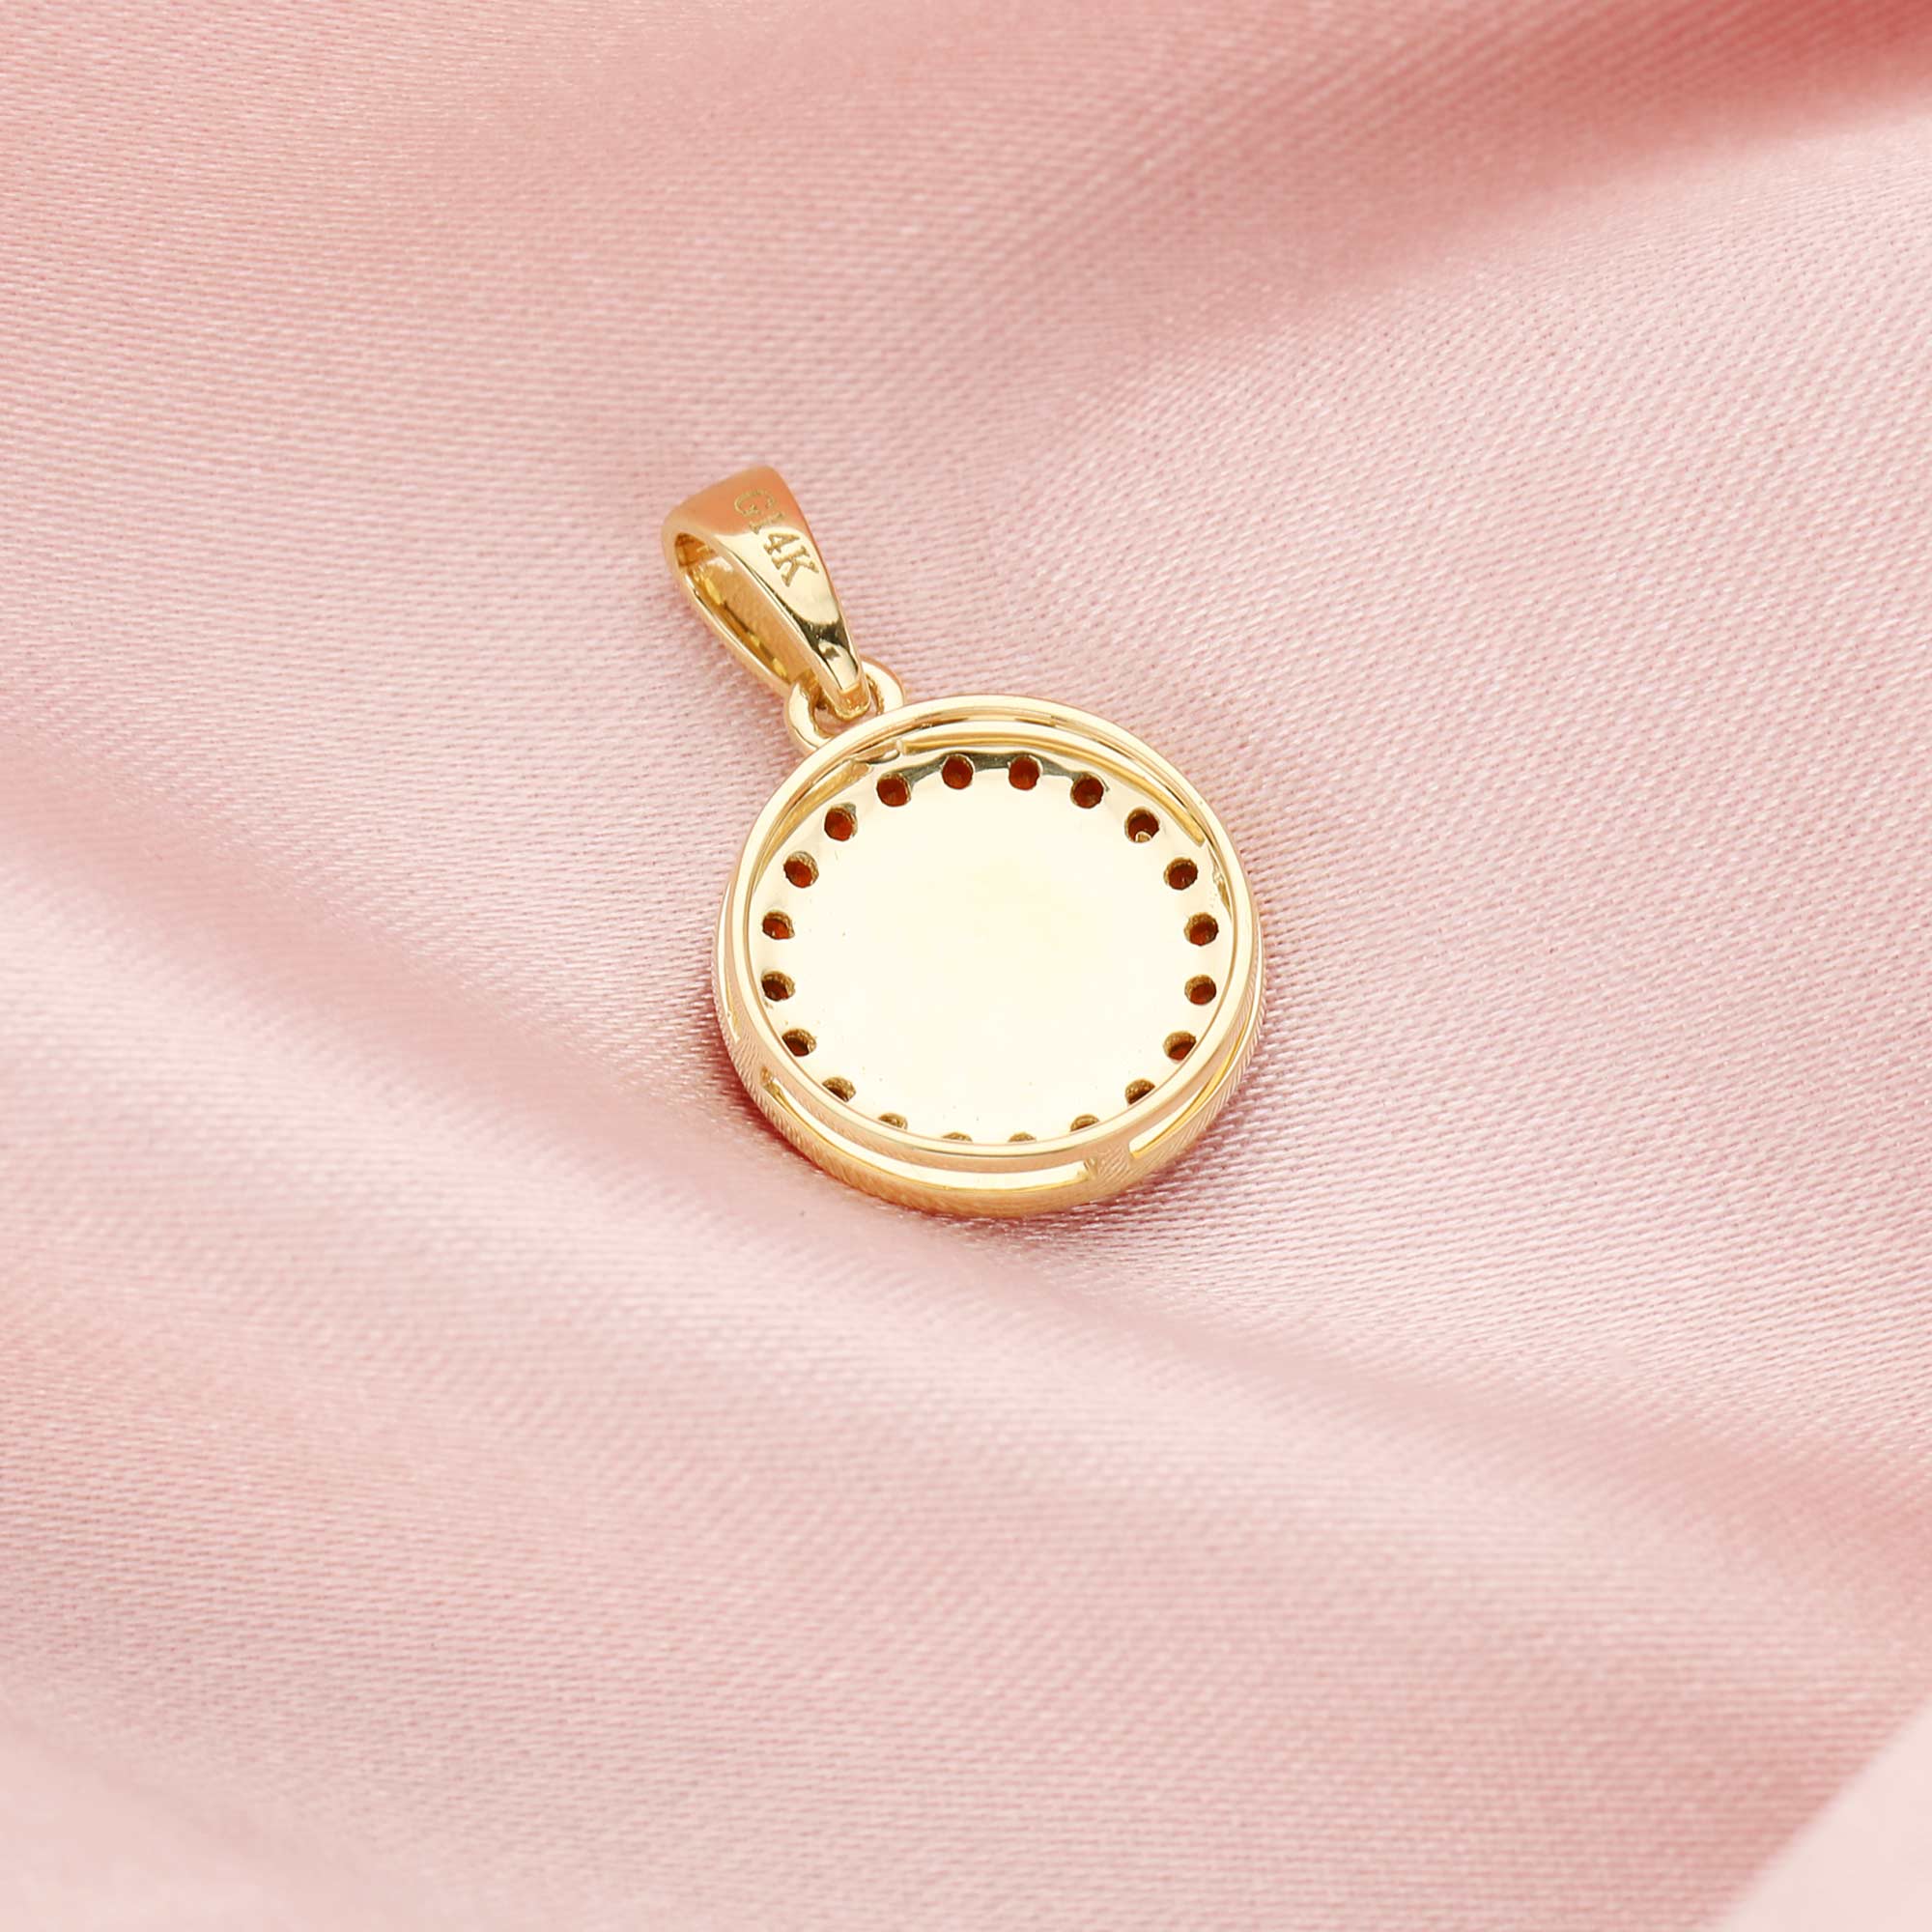 8MM Keepsake Breast Milk Round Pendant Bezel with Birthstone,Solid 14K 18K Gold Charm,Halo Birthstone Deco Charm,DIY Solid Back Charm Bezel For Resin 1411326 - Click Image to Close